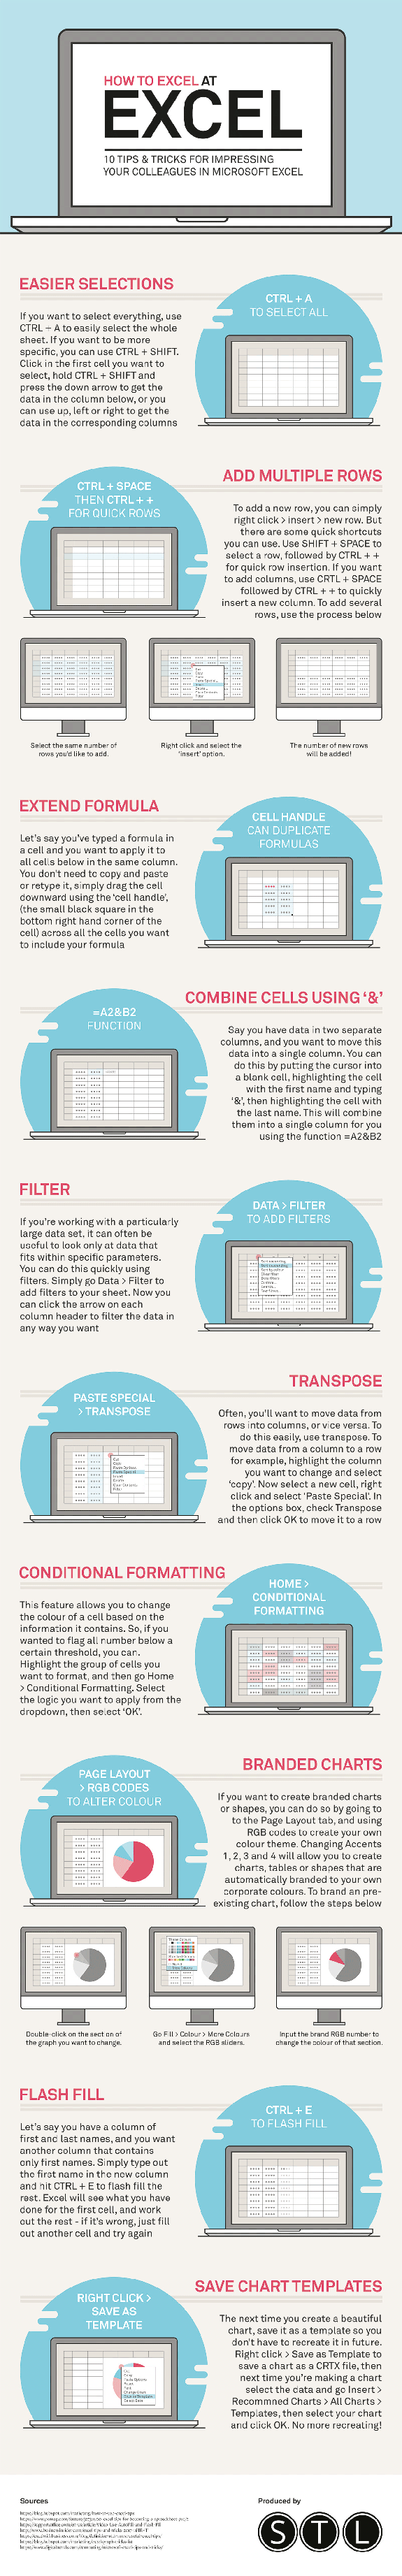 Excel at Excel infographic